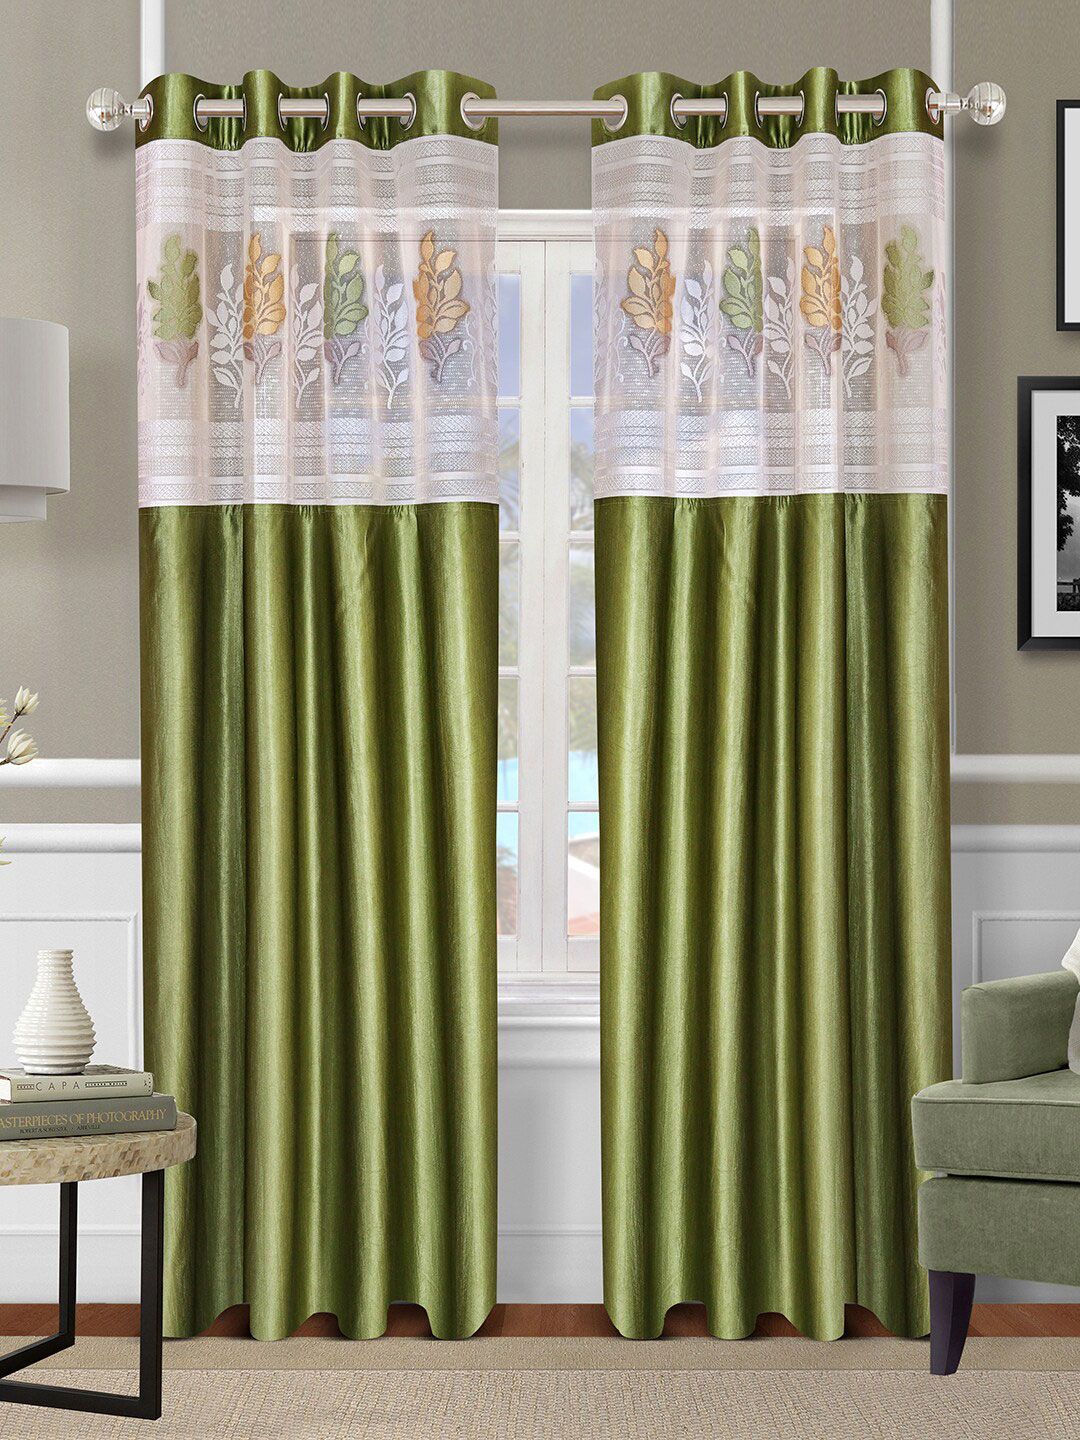 ROMEE Set Of 2 Green Floral Printed Polyester Door Curtains Price in India